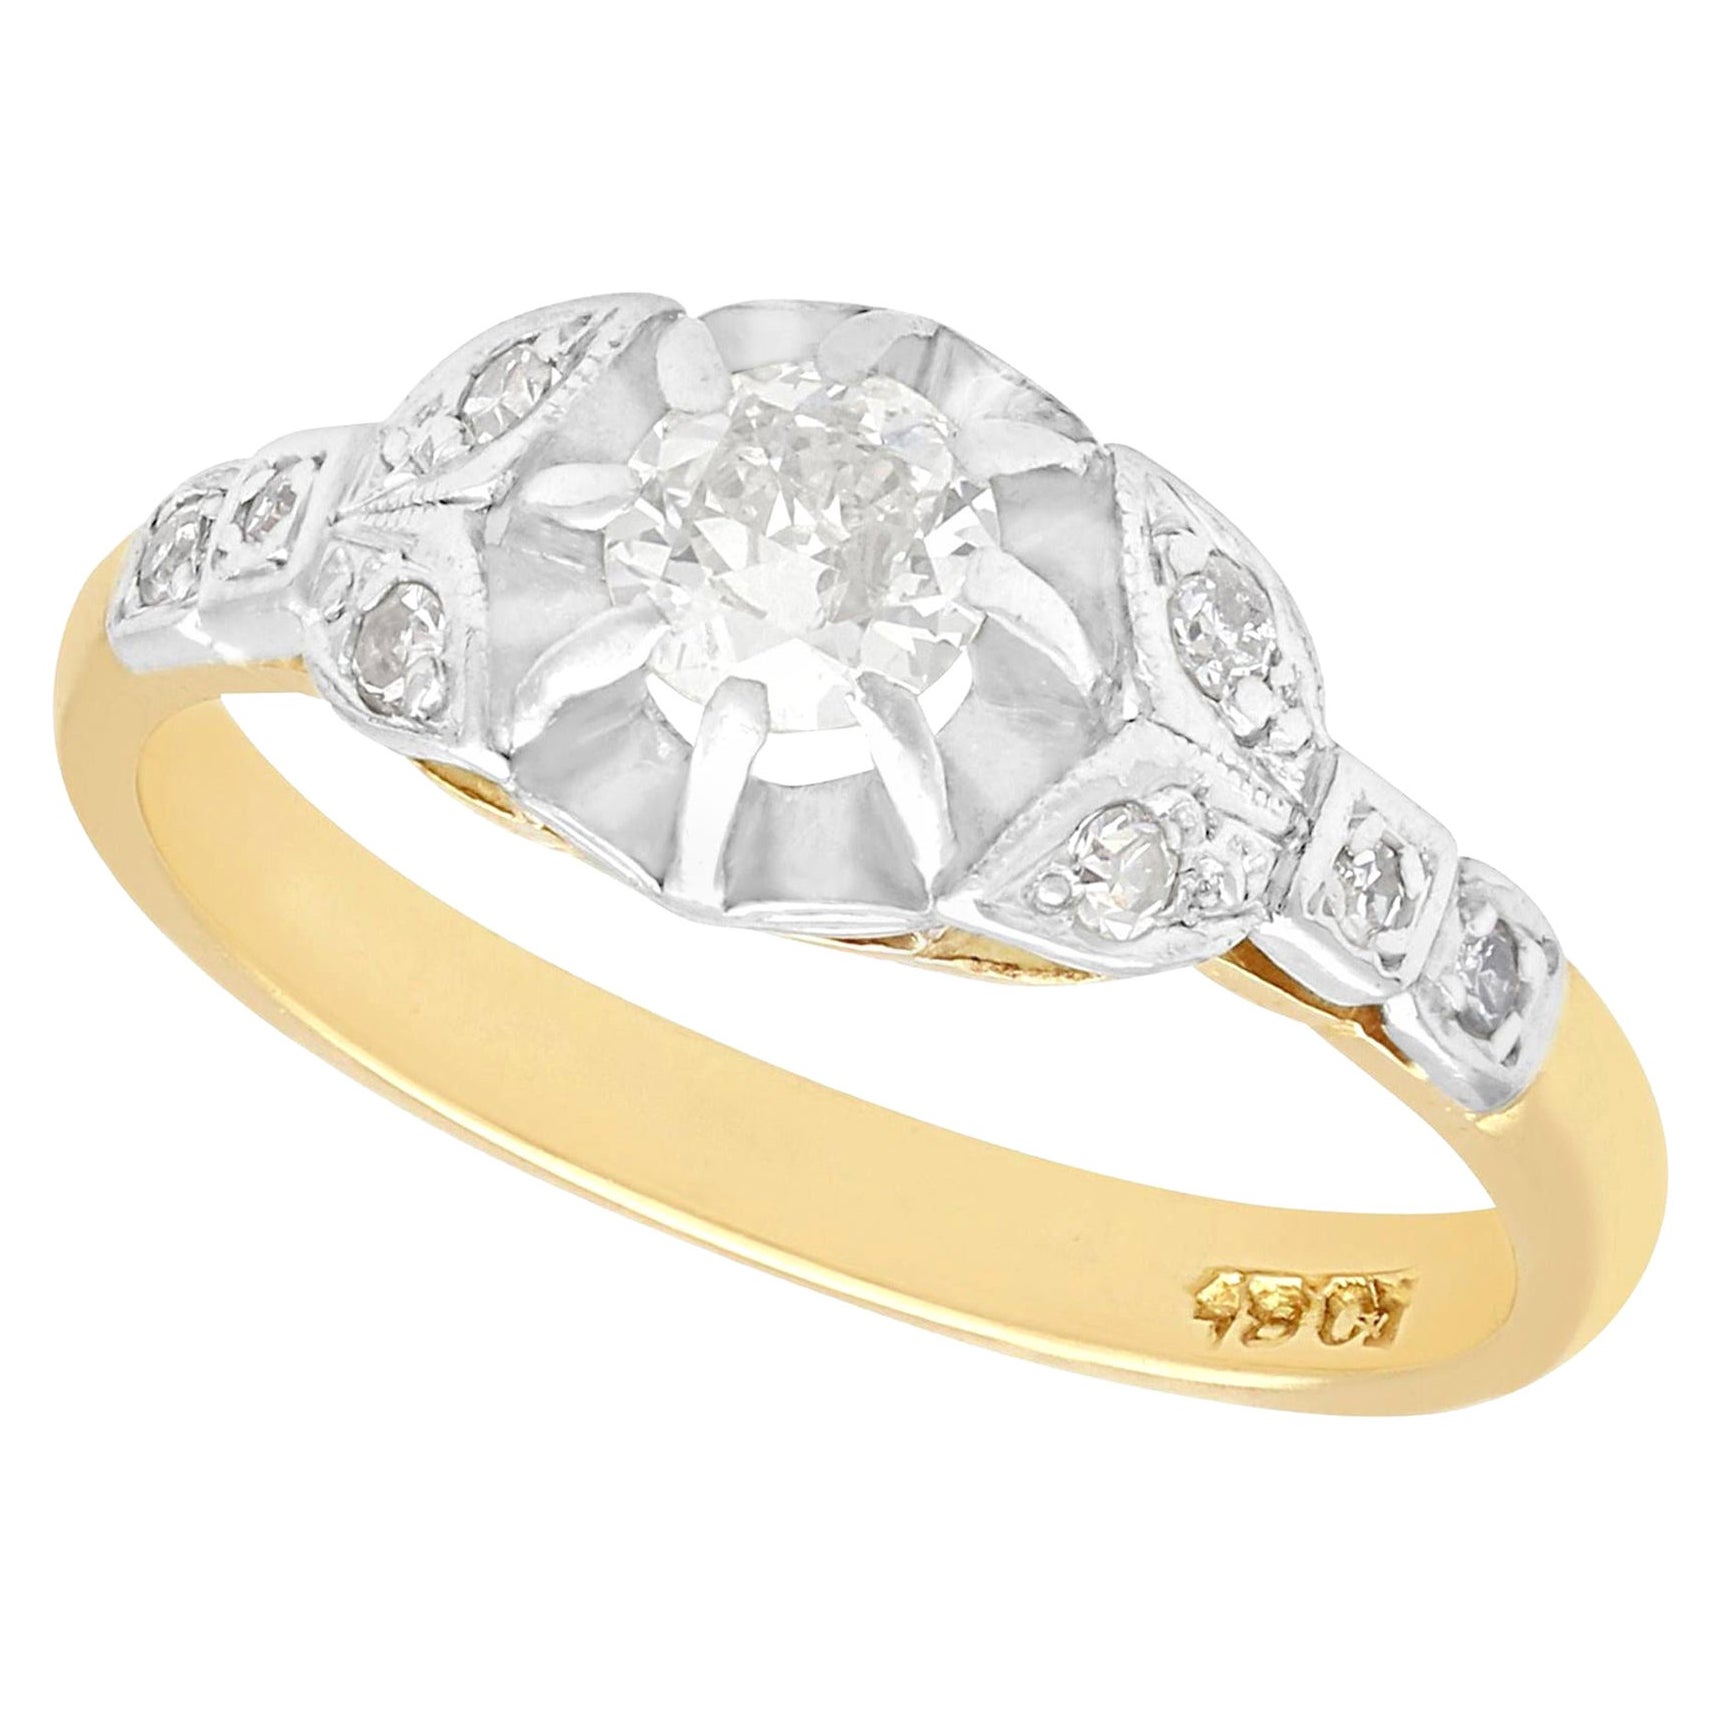 1920s Diamond and Yellow Gold Solitaire Engagement Ring